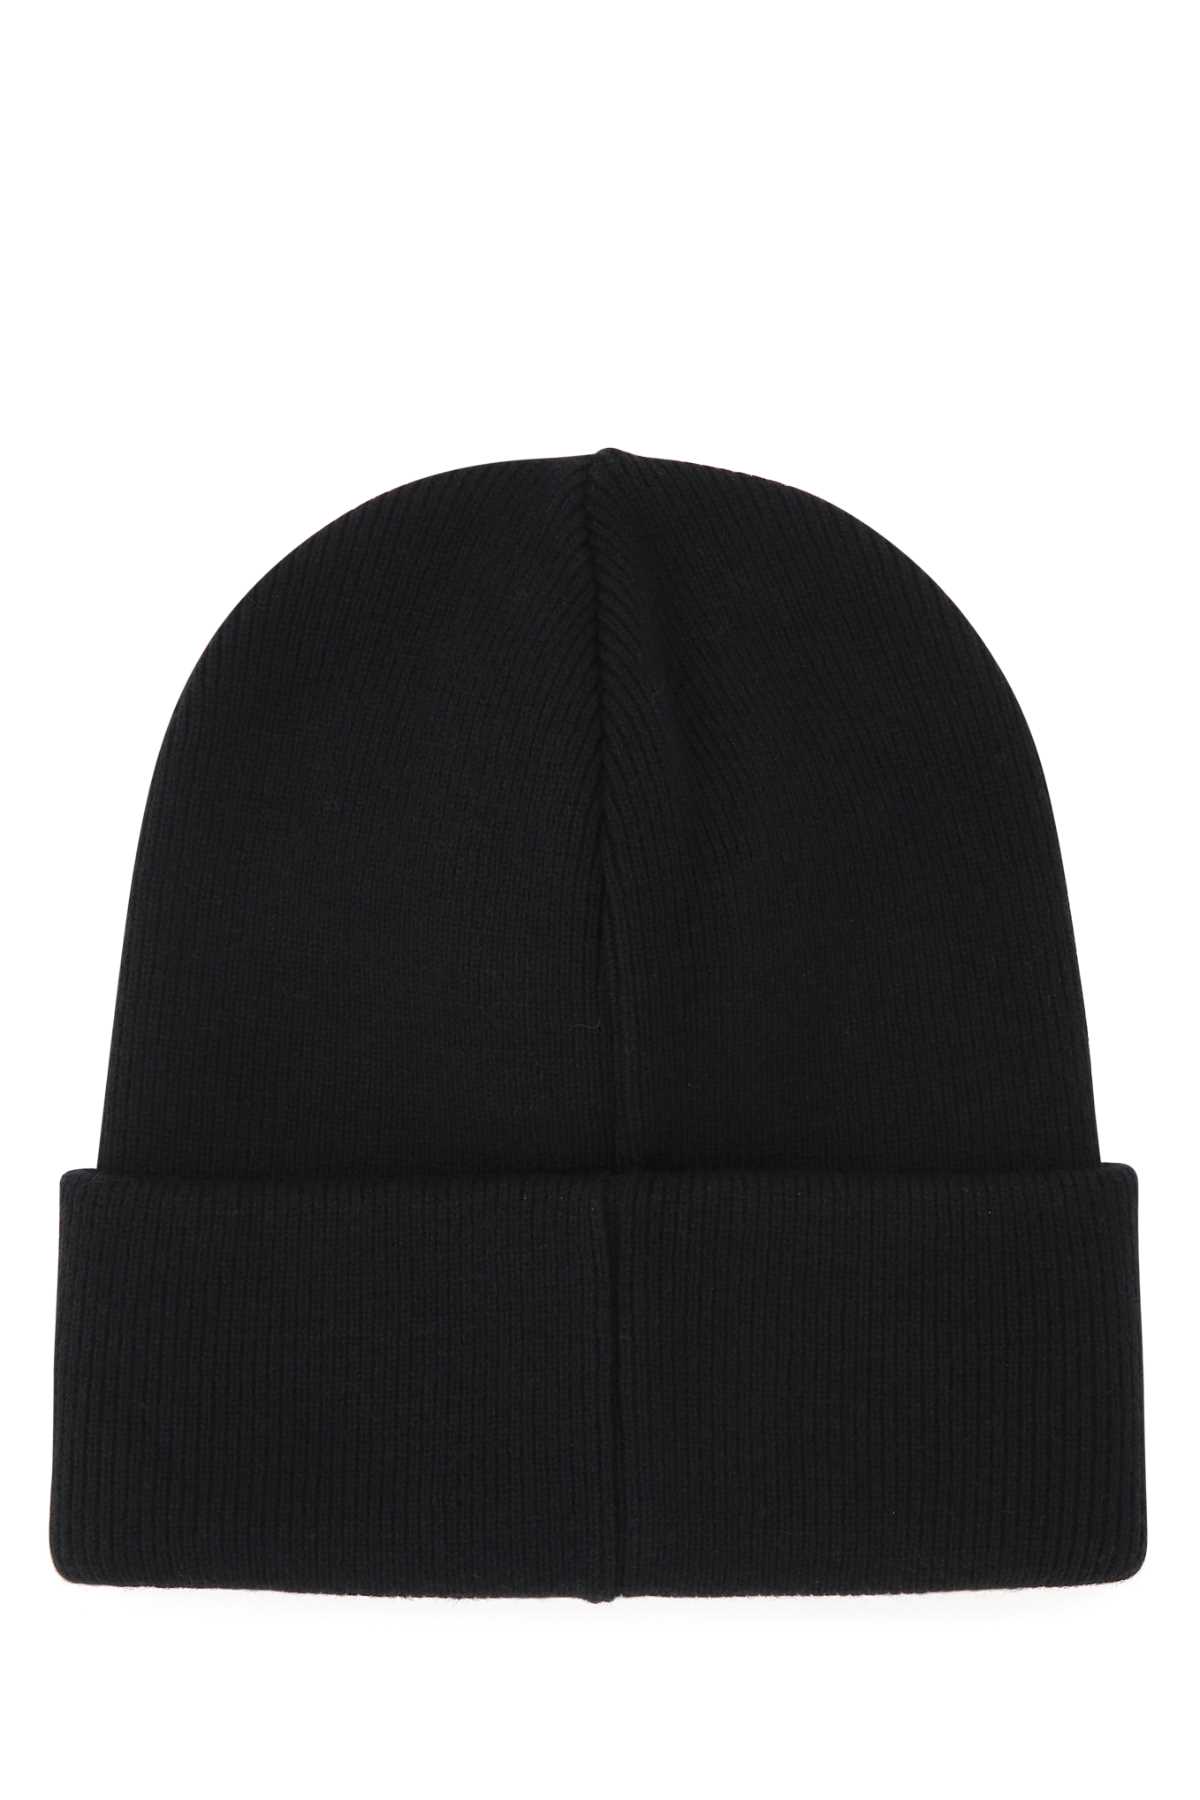 Dsquared2 Black Wool Beanie Hat In M063